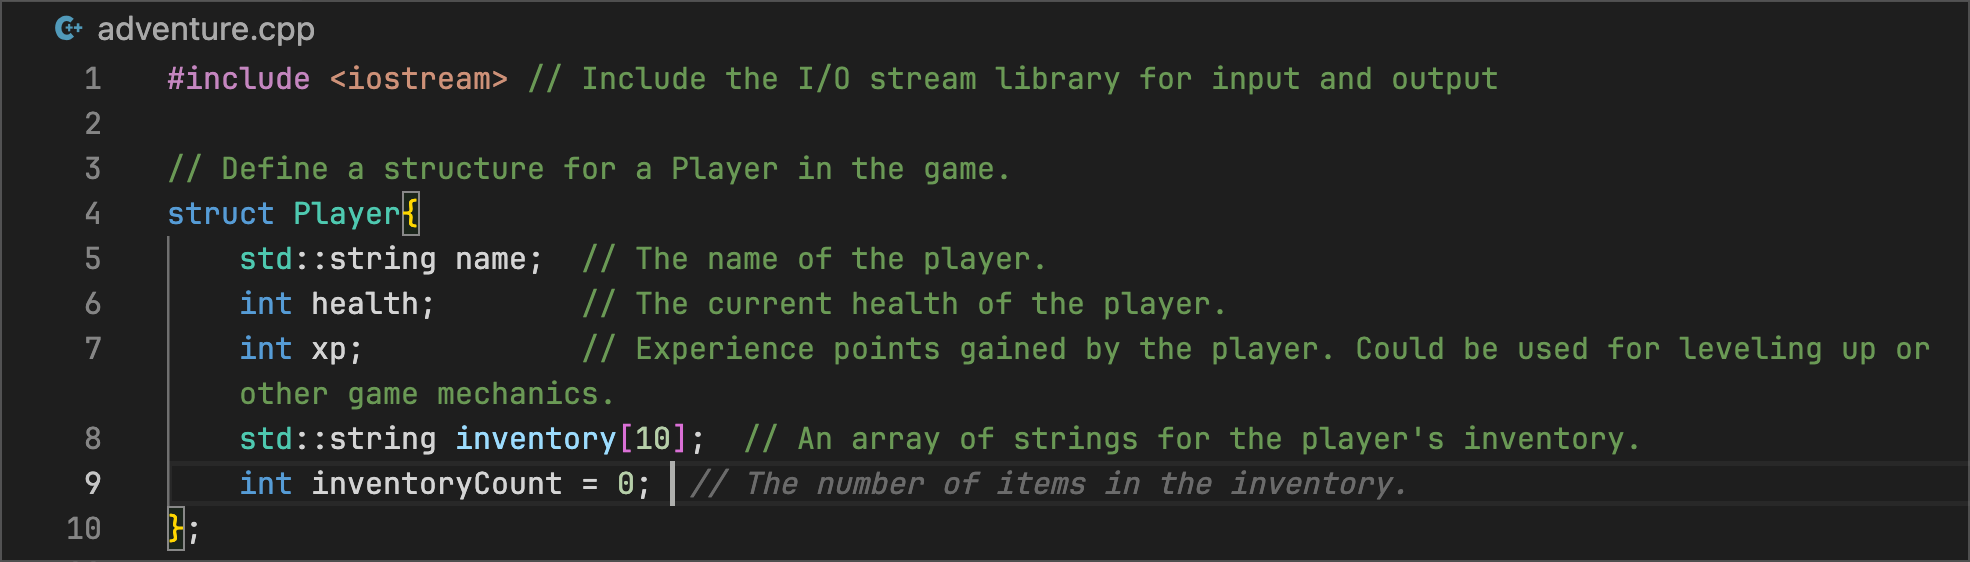 adventure.cpp - Code Suggestions shows us how to add an integer for inventoryCount to the player struct